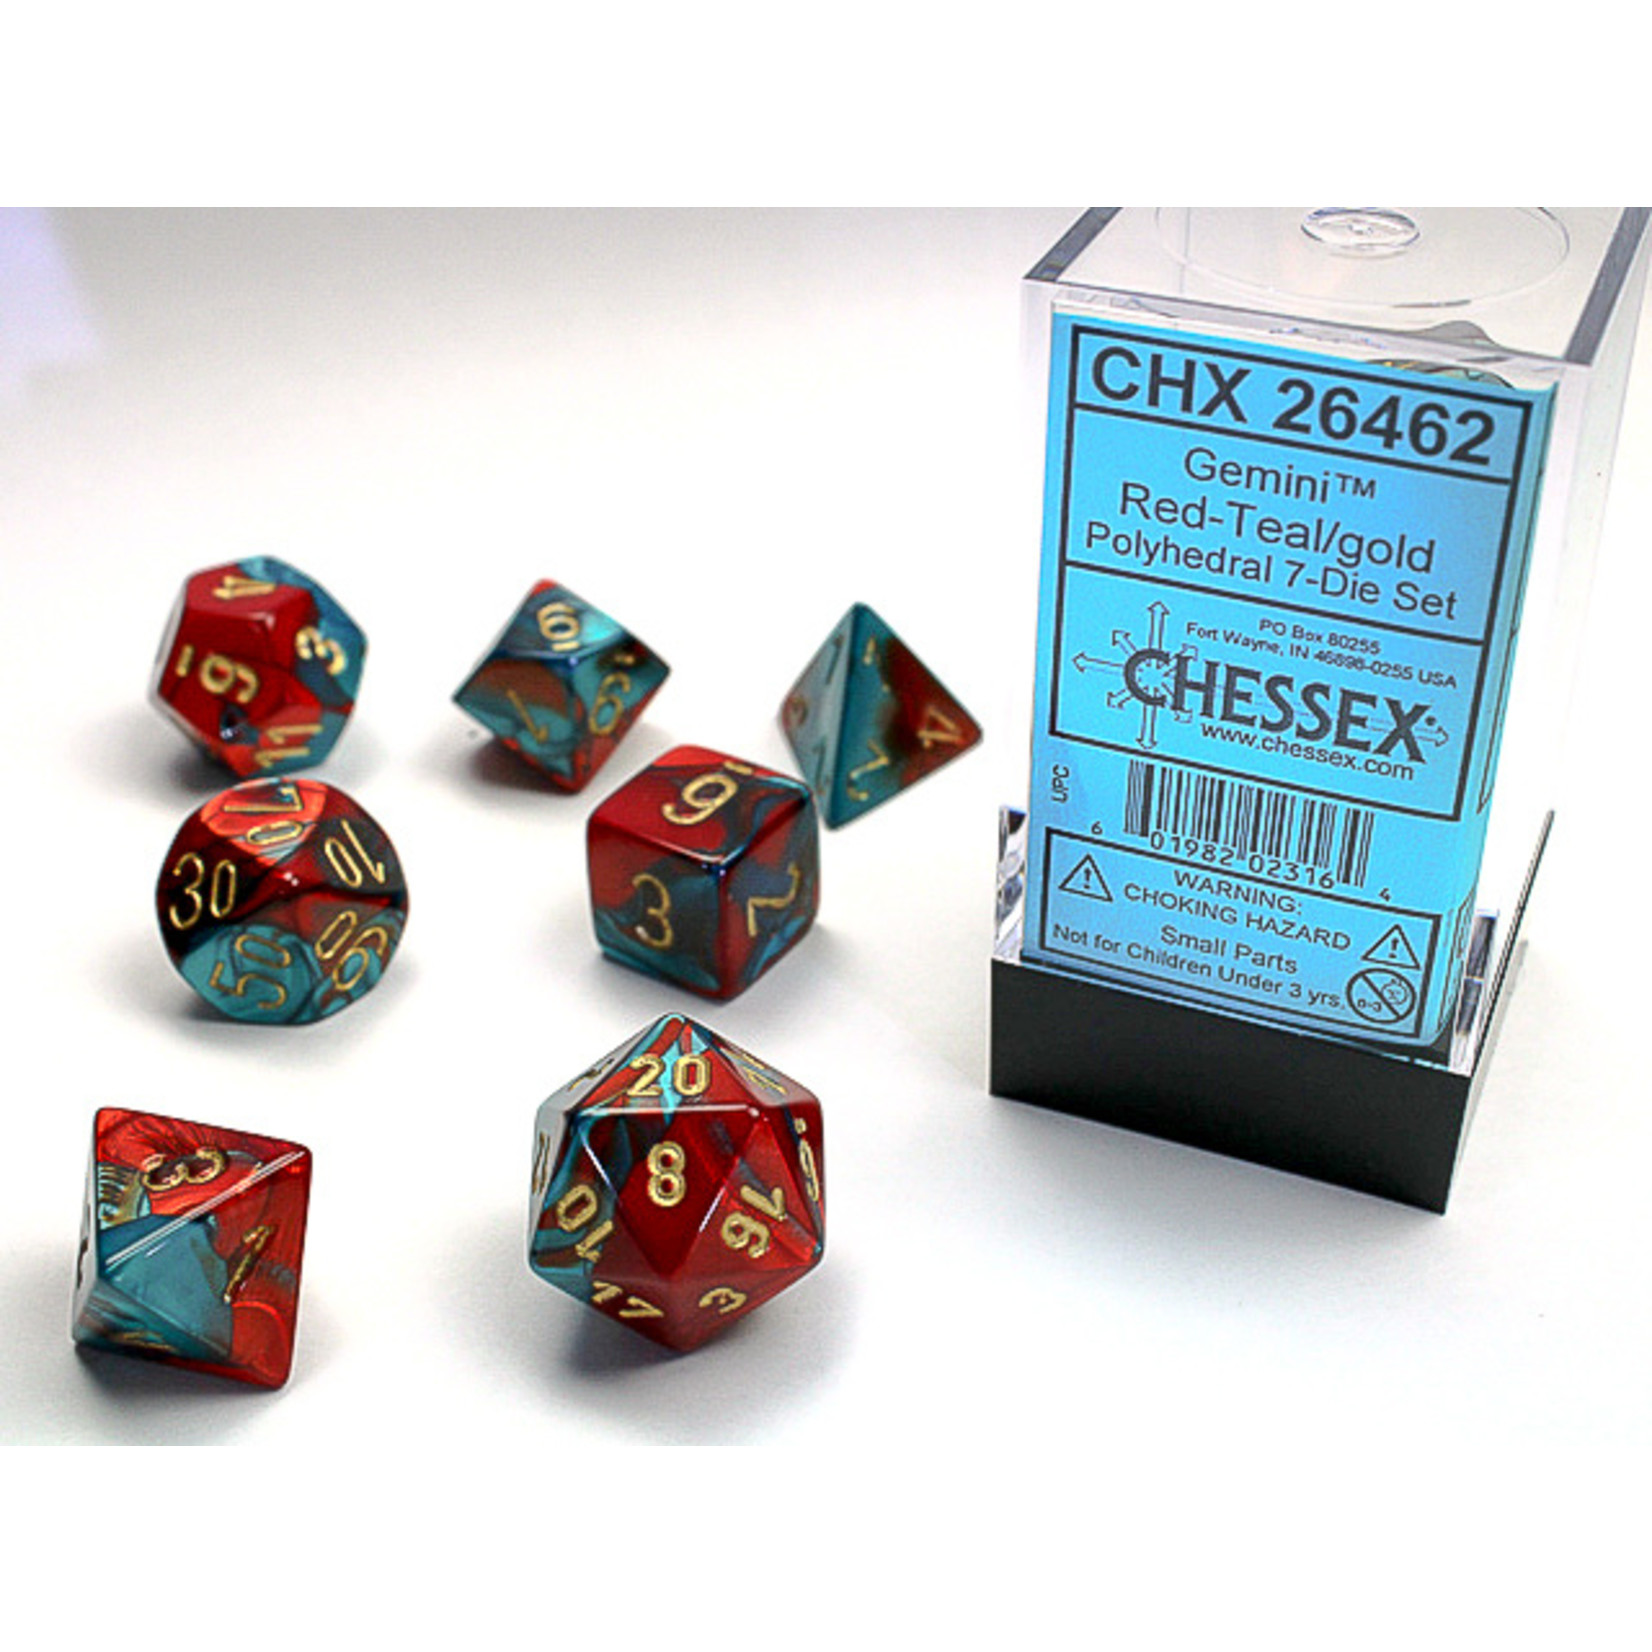 Chessex 26462 Gemini Red-Teal with Gold 7-Set